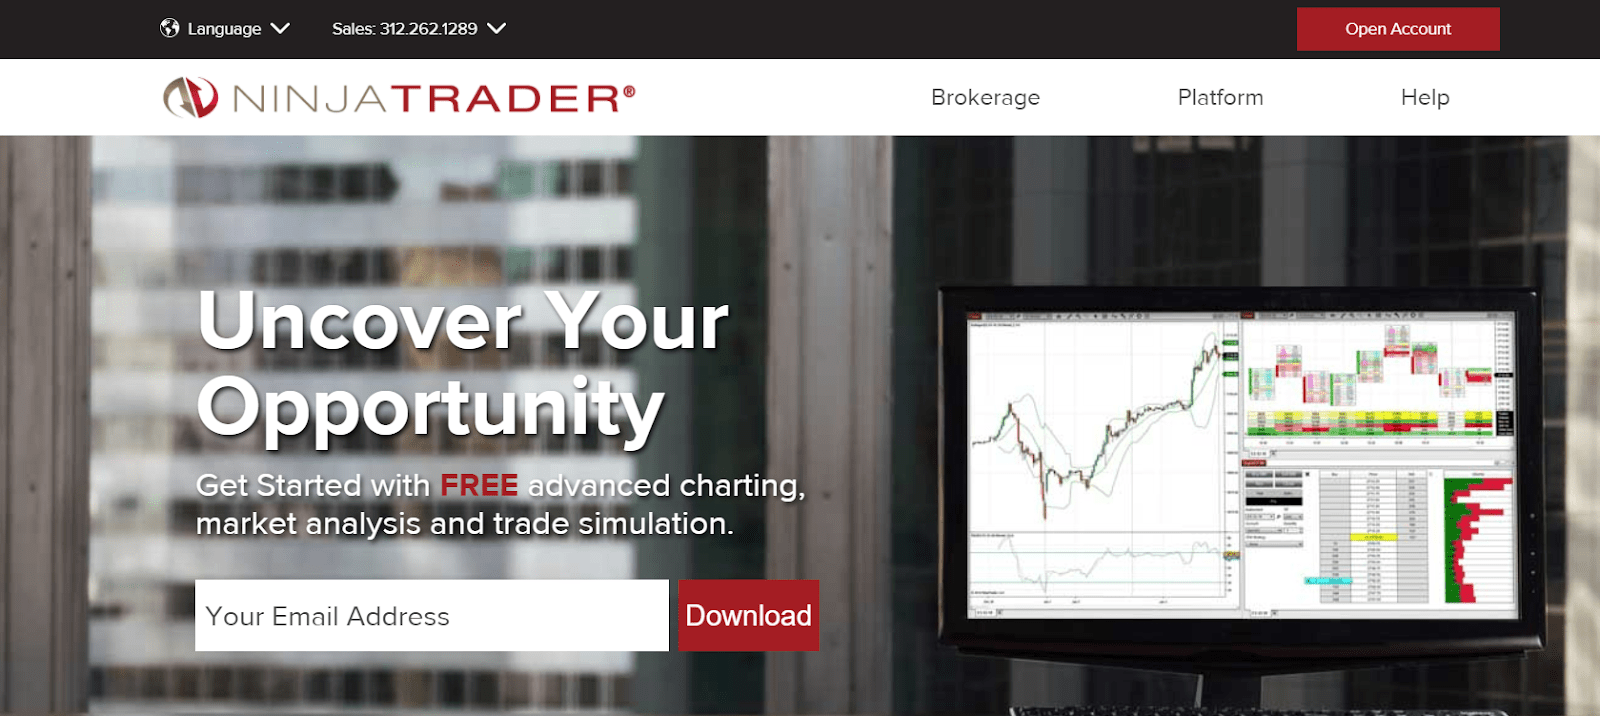 Ninja Trader Review - Ouvrir un compte